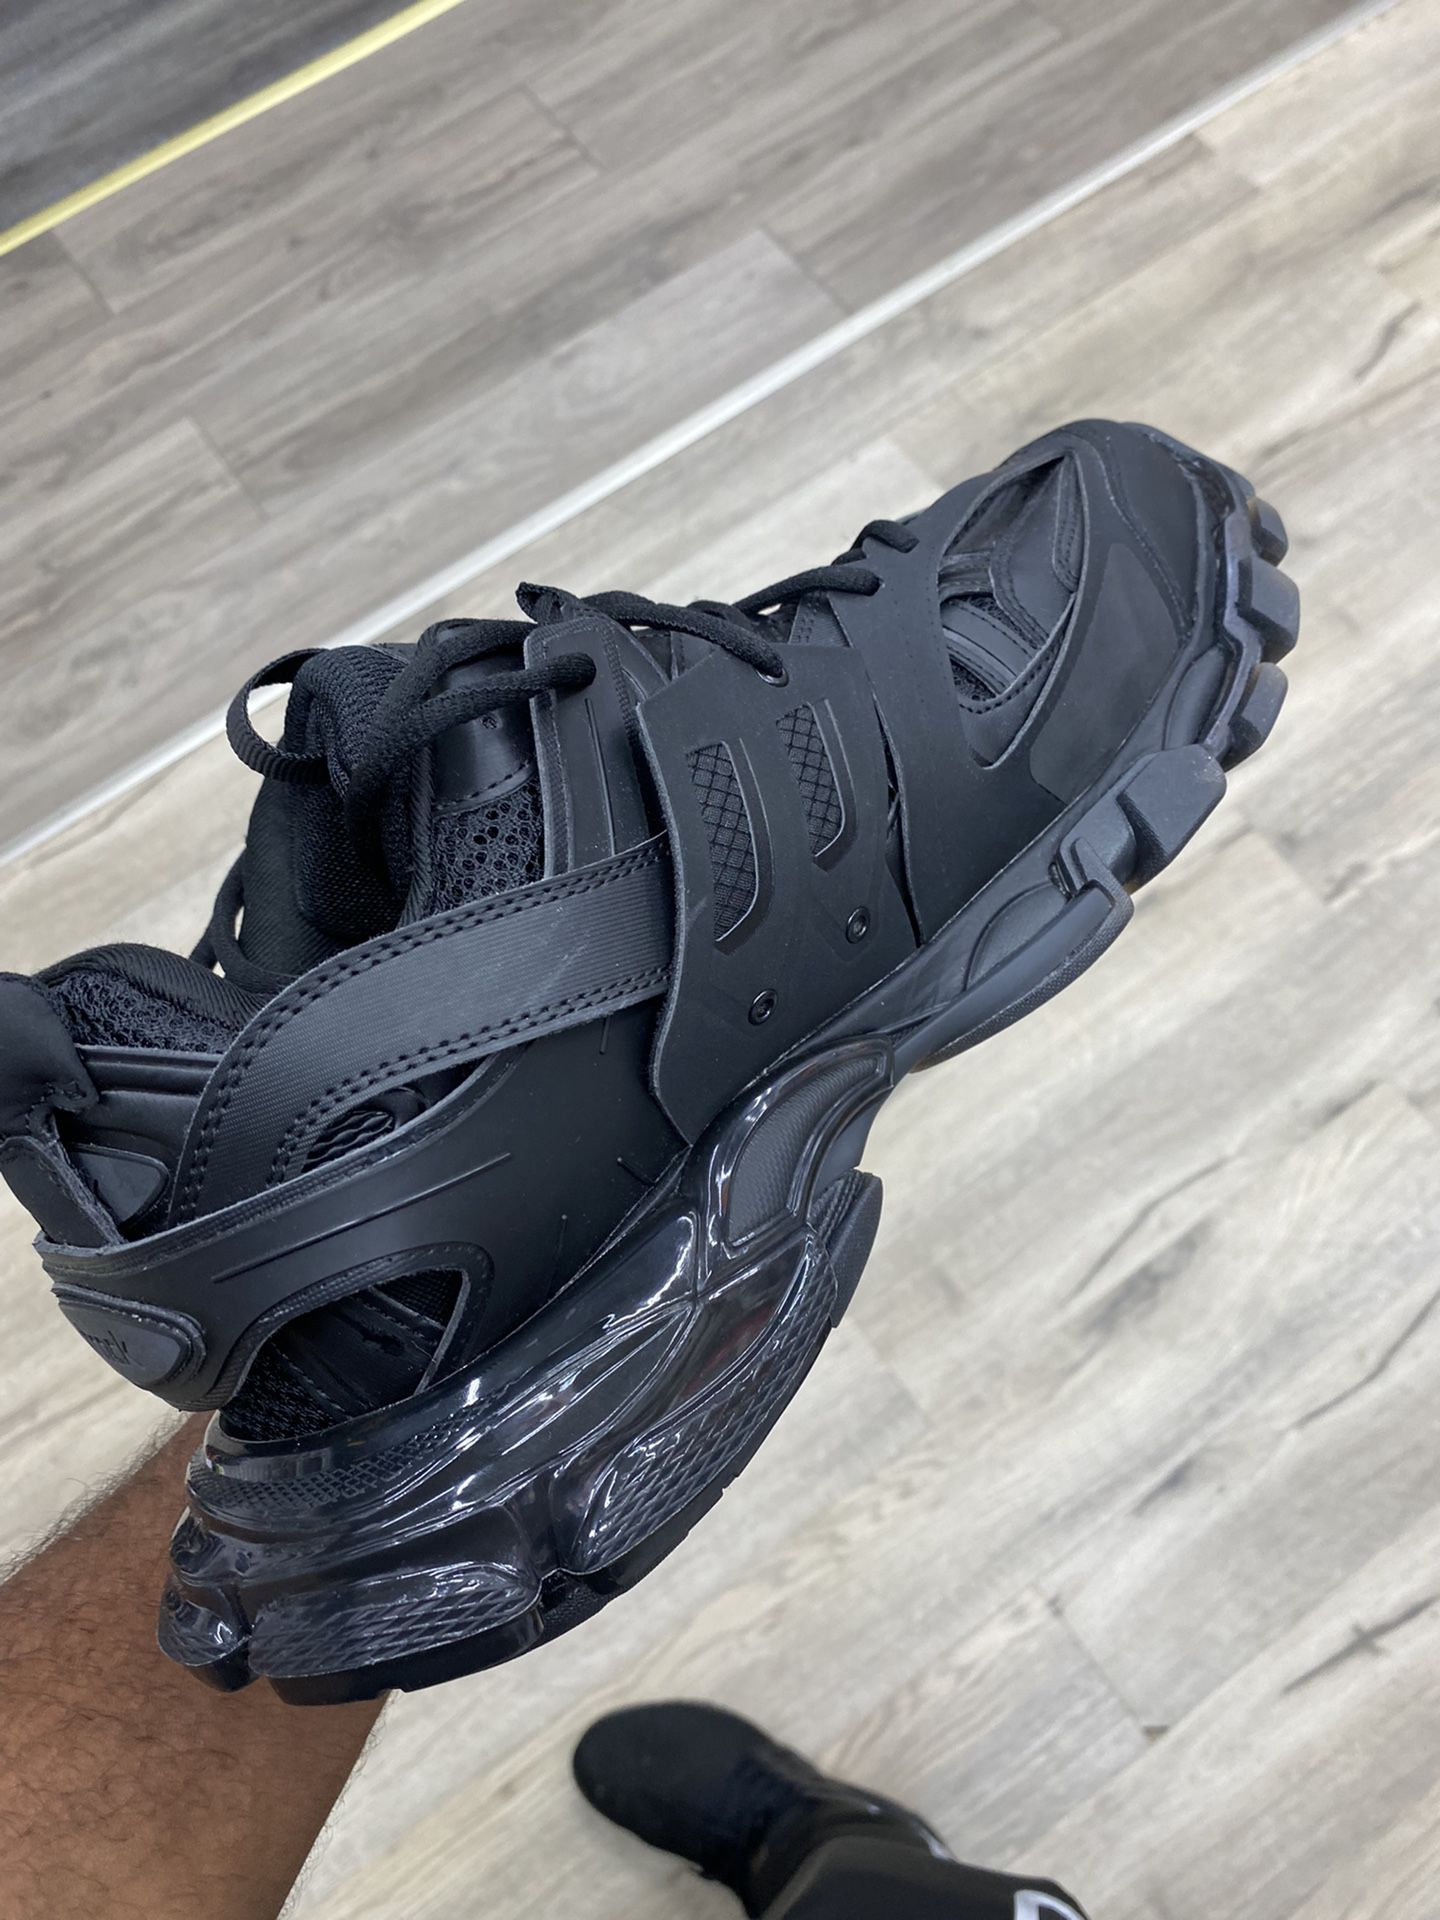 Balenciaga Track Sneakers Red Size 45 Deadstock for Sale in Los Angeles, CA  - OfferUp